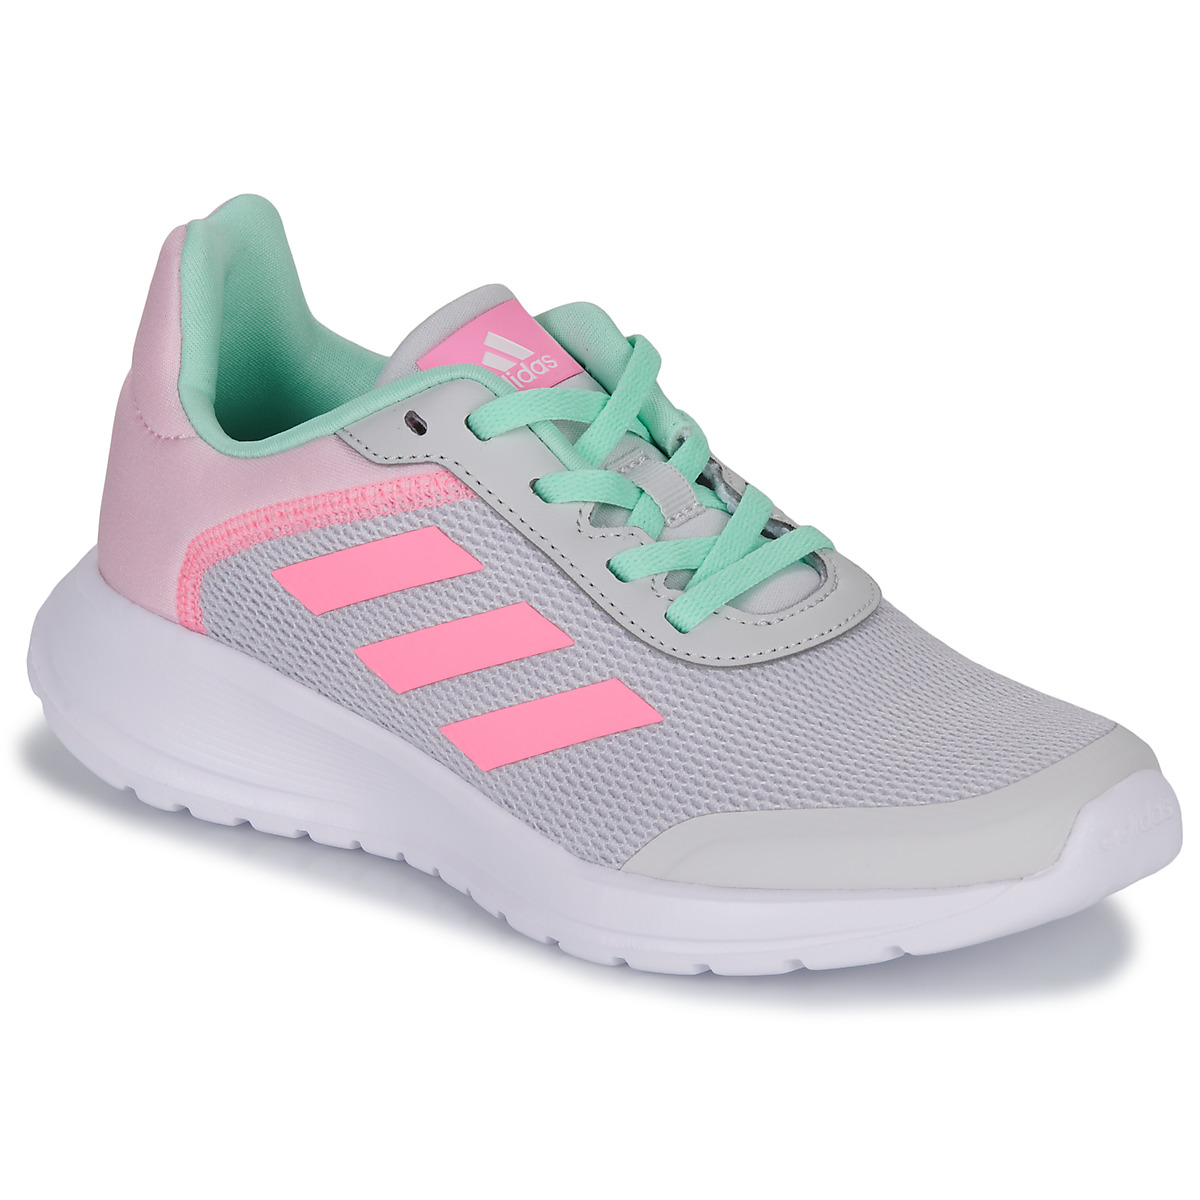 Adidas Sportswear 2.0 € Child delivery Fast Running-shoes Shoes Tensaur - Pink K Run Europe 35,20 - Green ! / | Spartoo